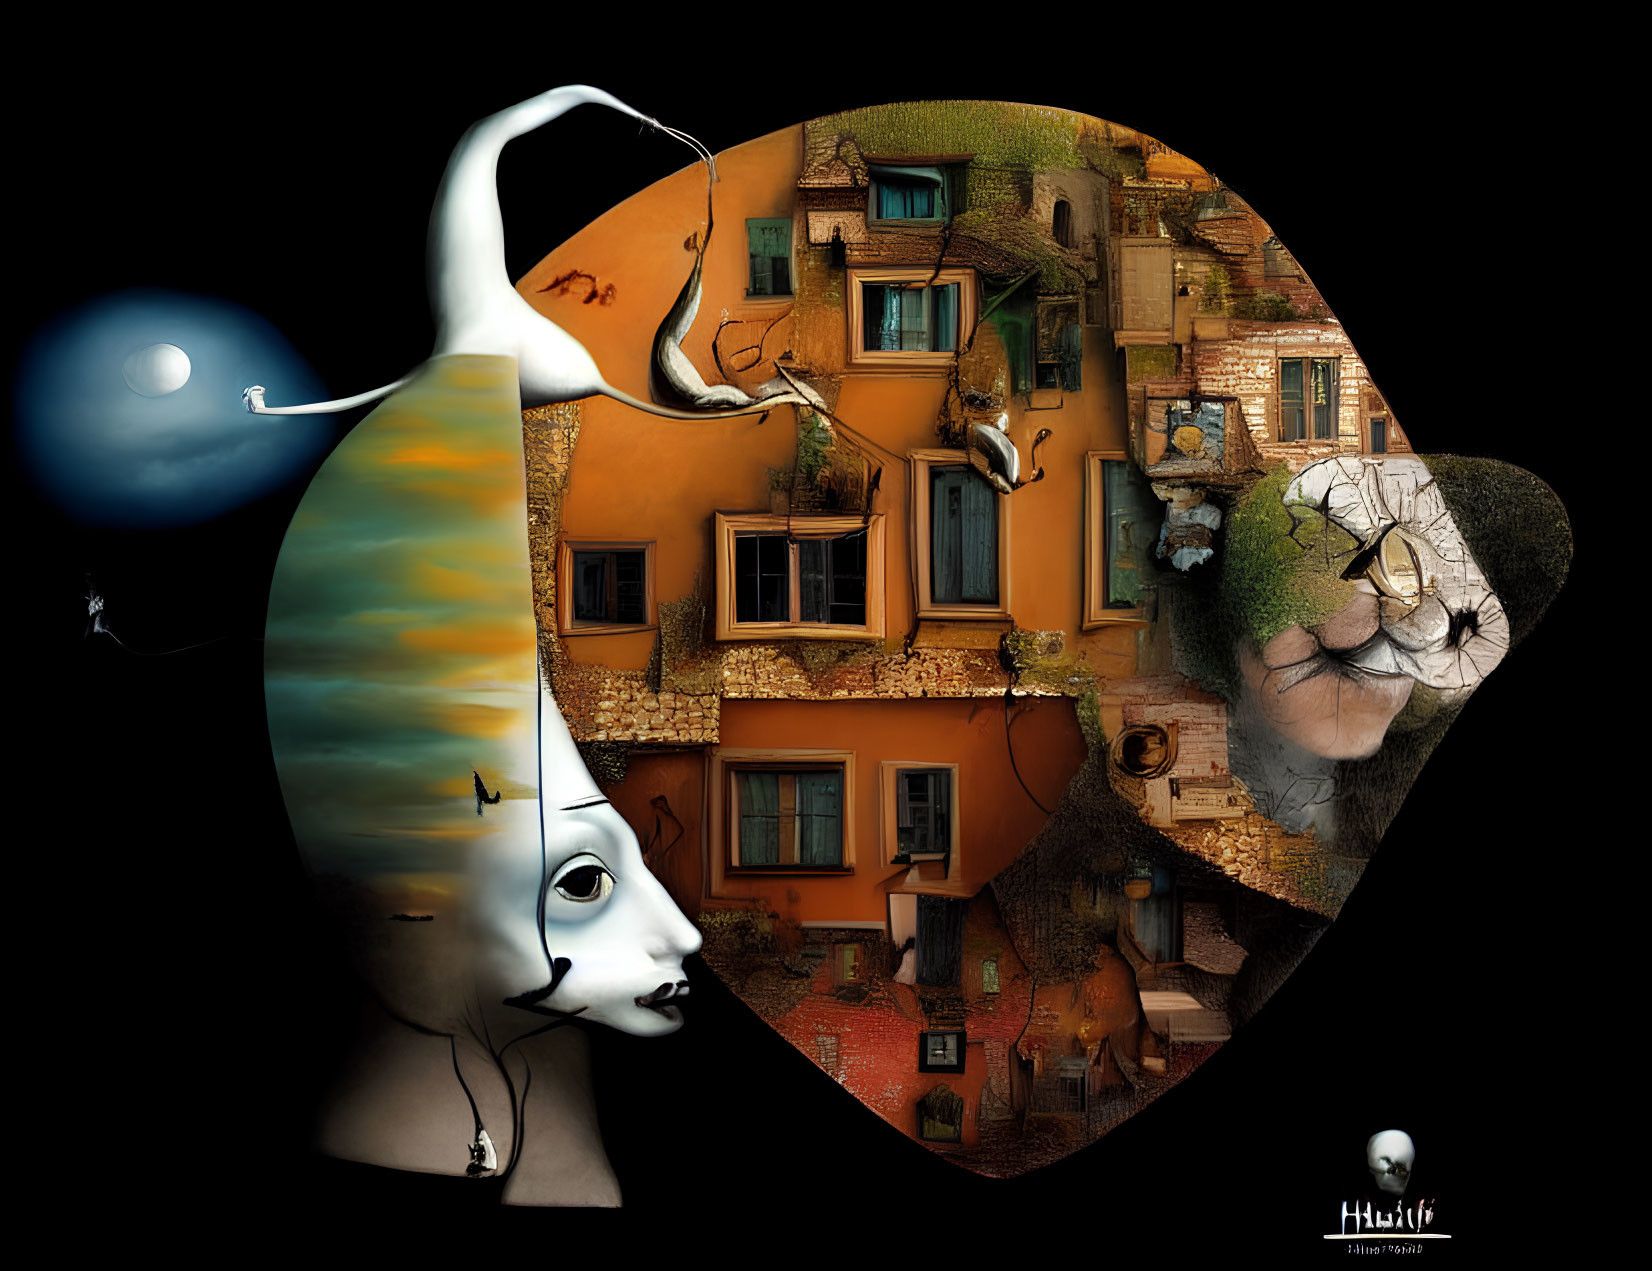 Surreal artwork: Woman's profile merges with old town, vibrant houses, whimsical shapes,